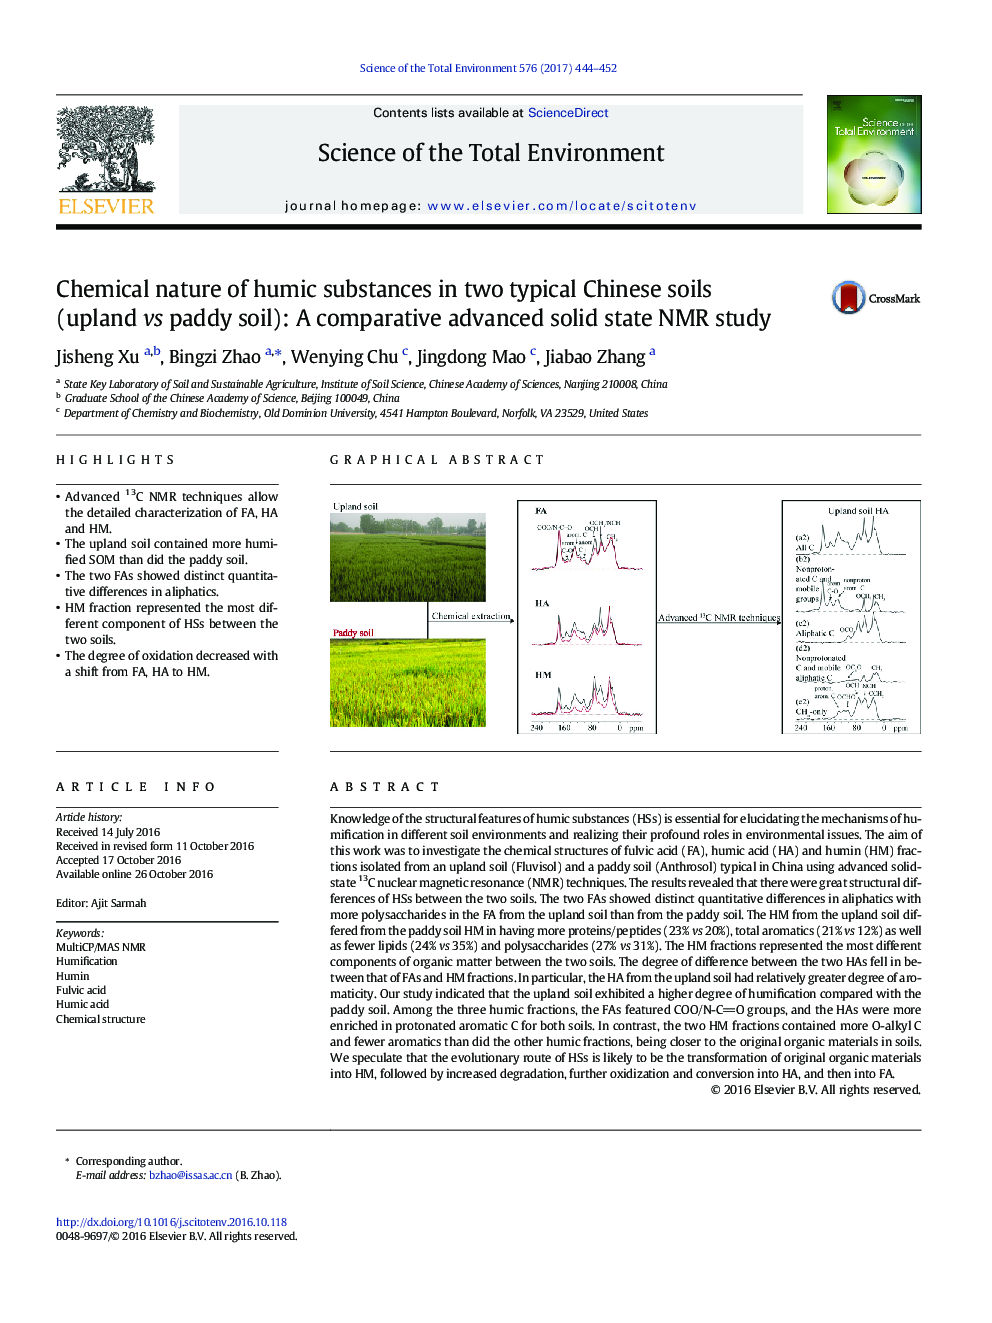 Chemical nature of humic substances in two typical Chinese soils (upland vs paddy soil): A comparative advanced solid state NMR study